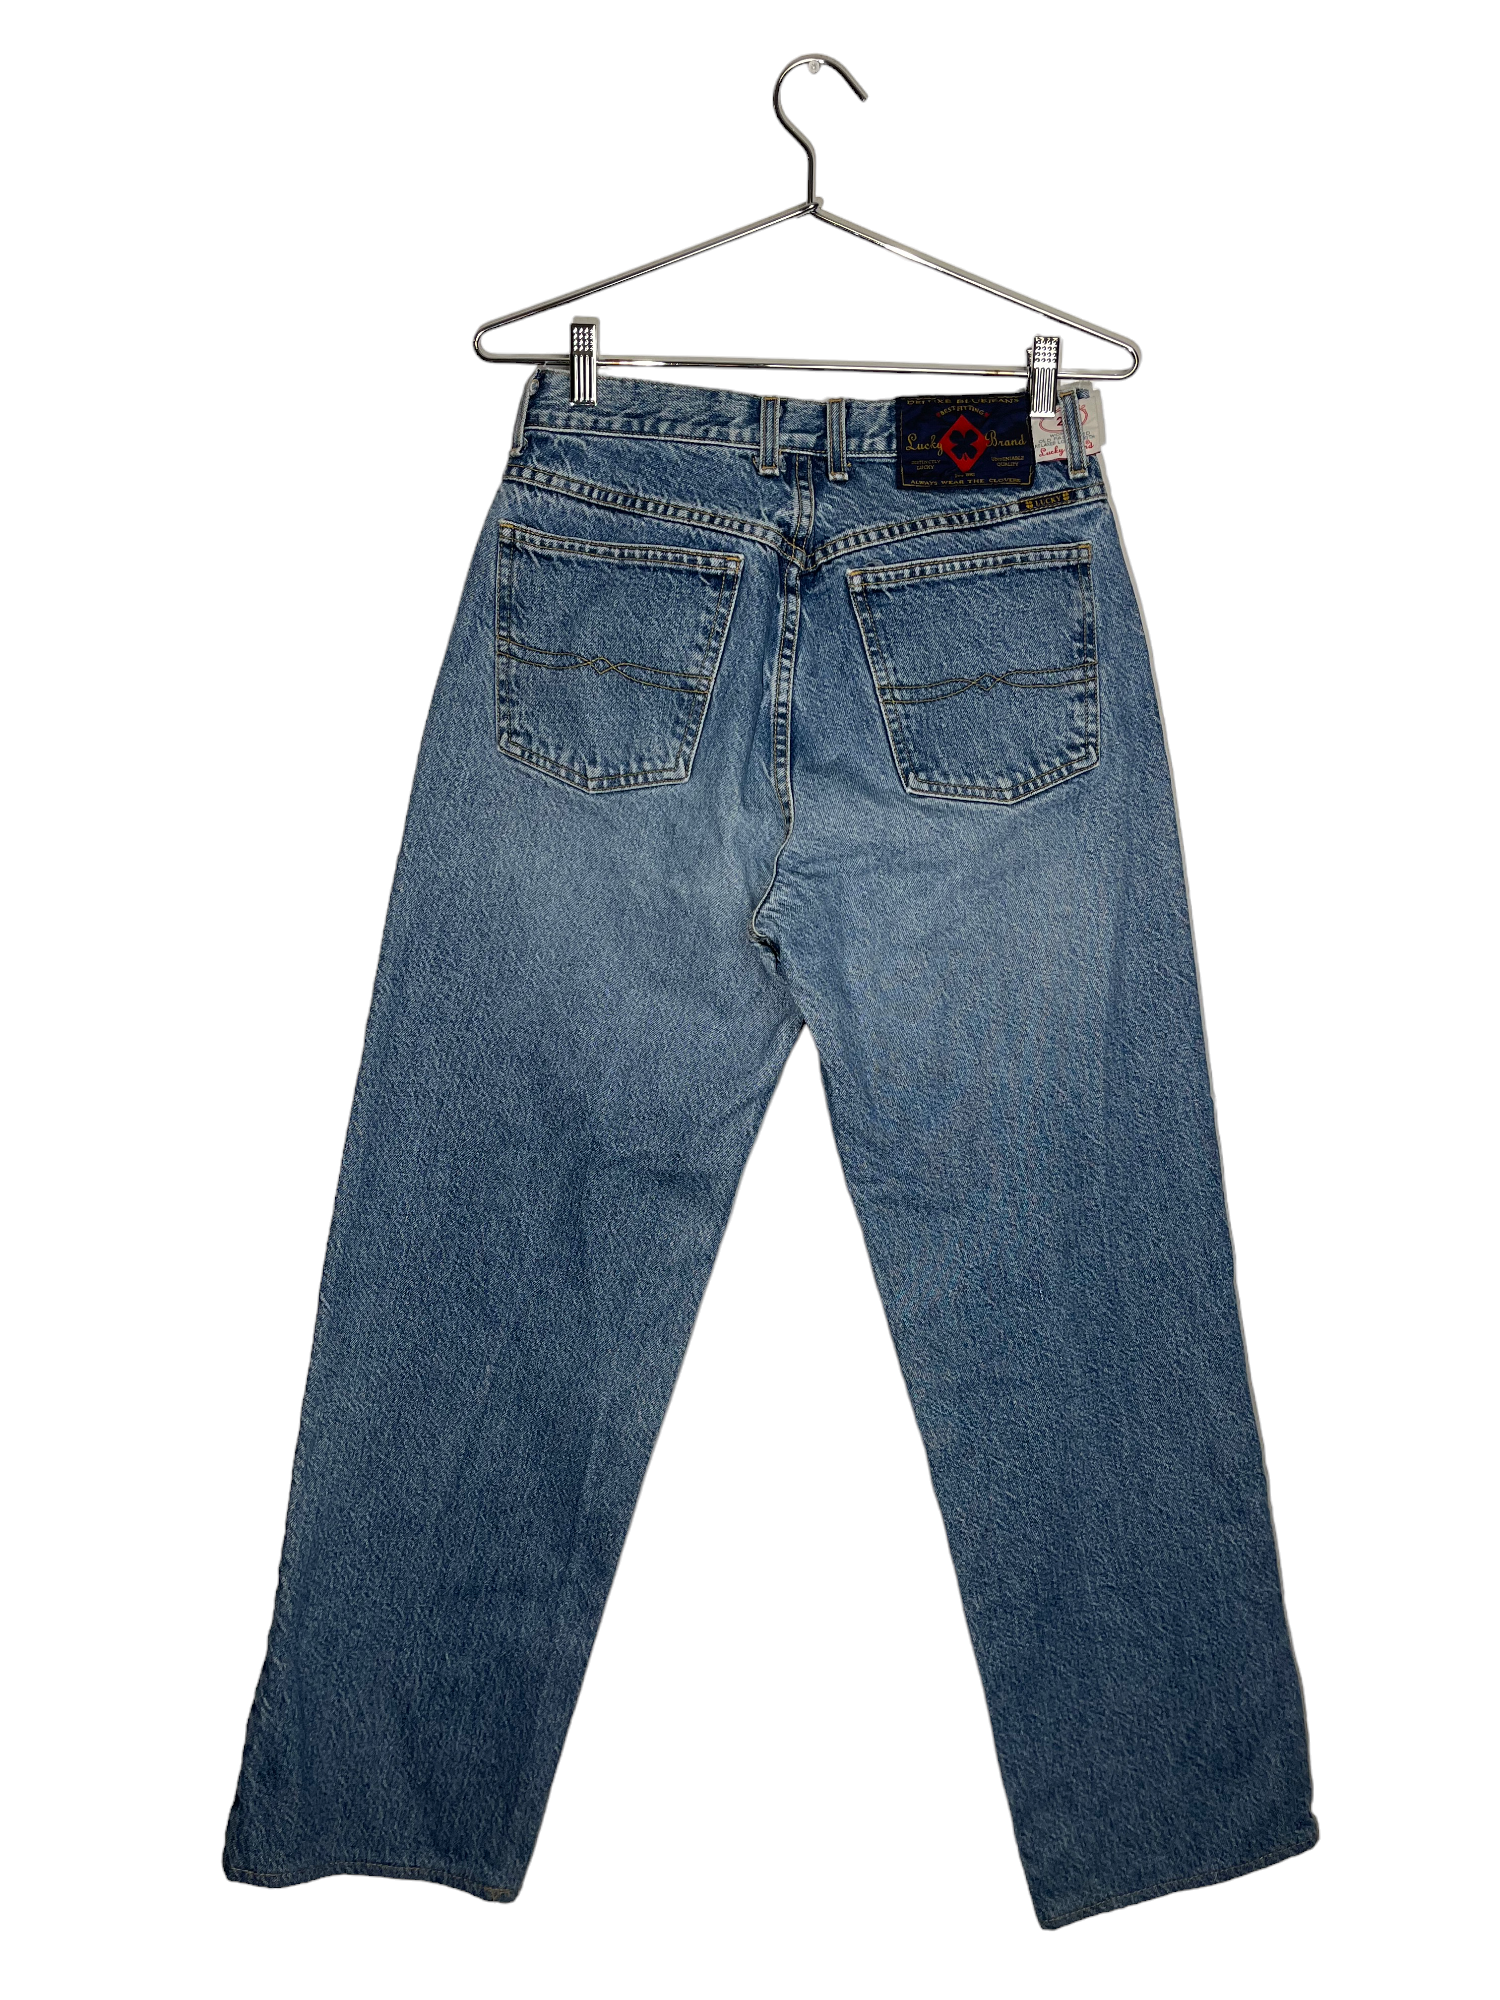 Lucky Brand Vintage Fit Button Jeans